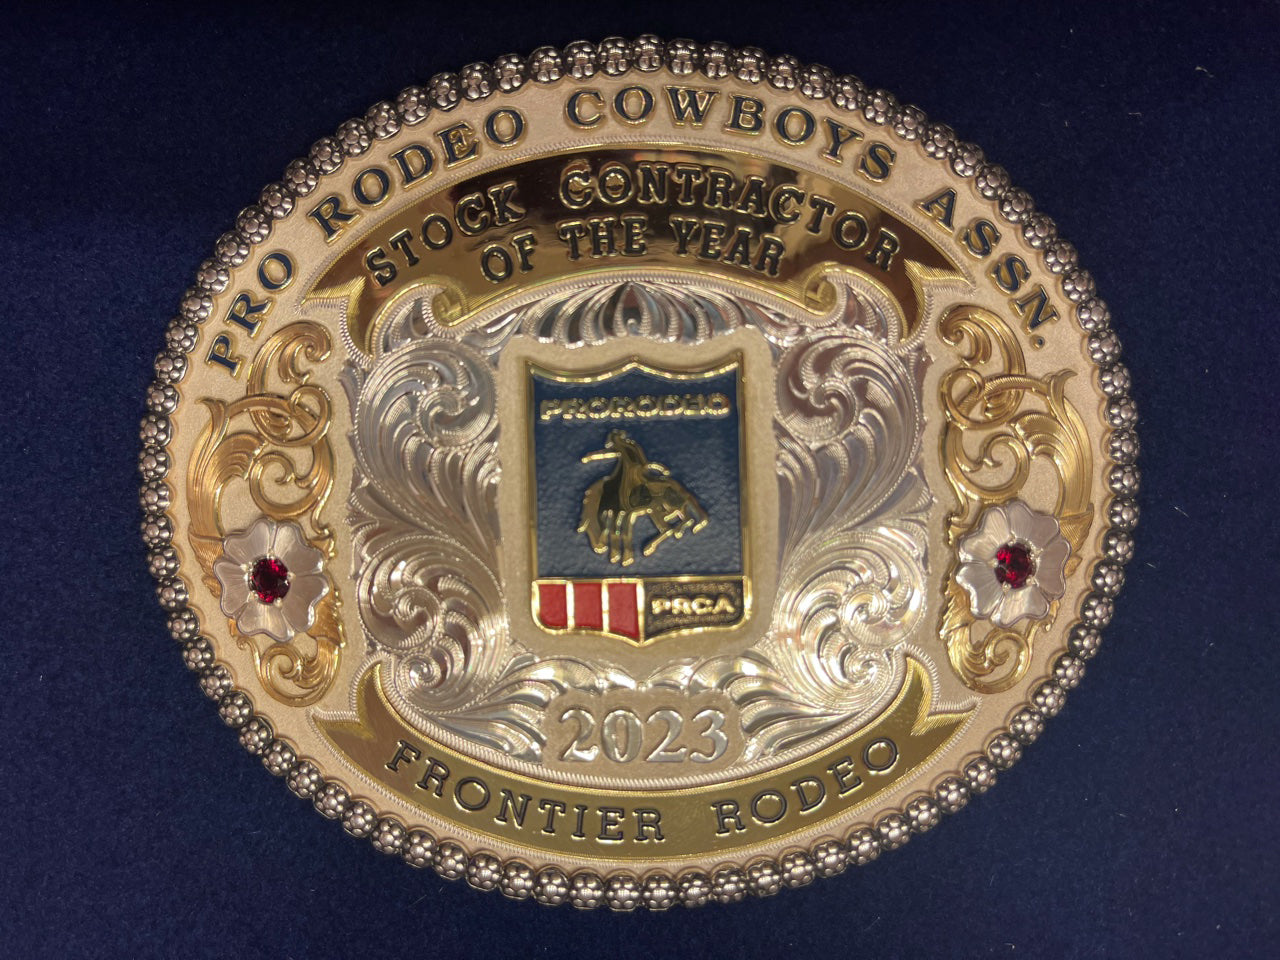 Frontier Rodeo Company Wins Ninth Consecutive Prca Stock Contractor of the Year Award